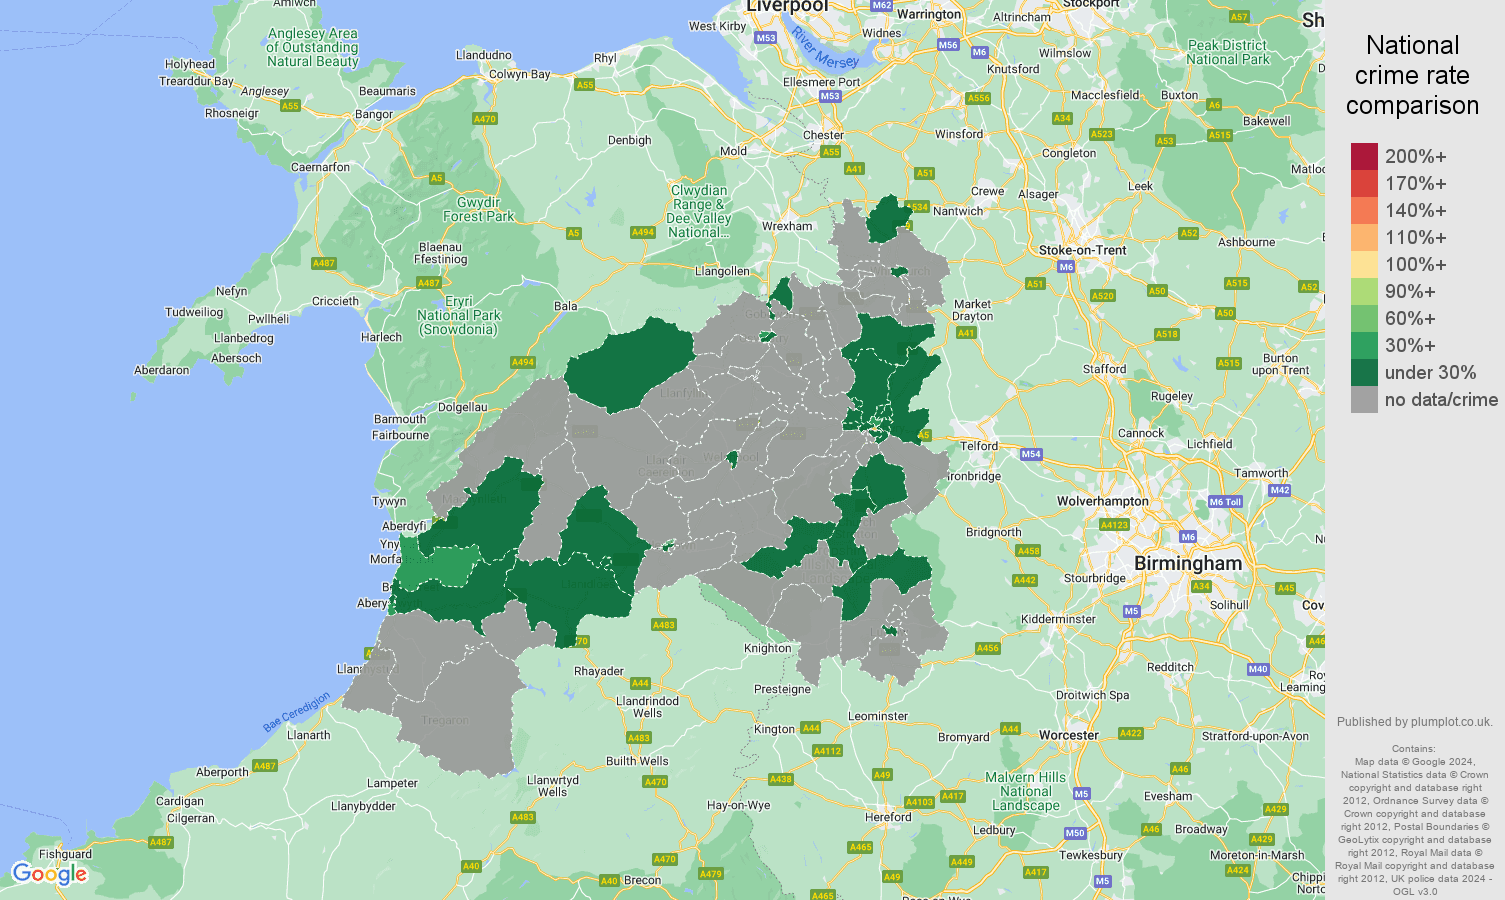 Shrewsbury theft from the person crime rate comparison map